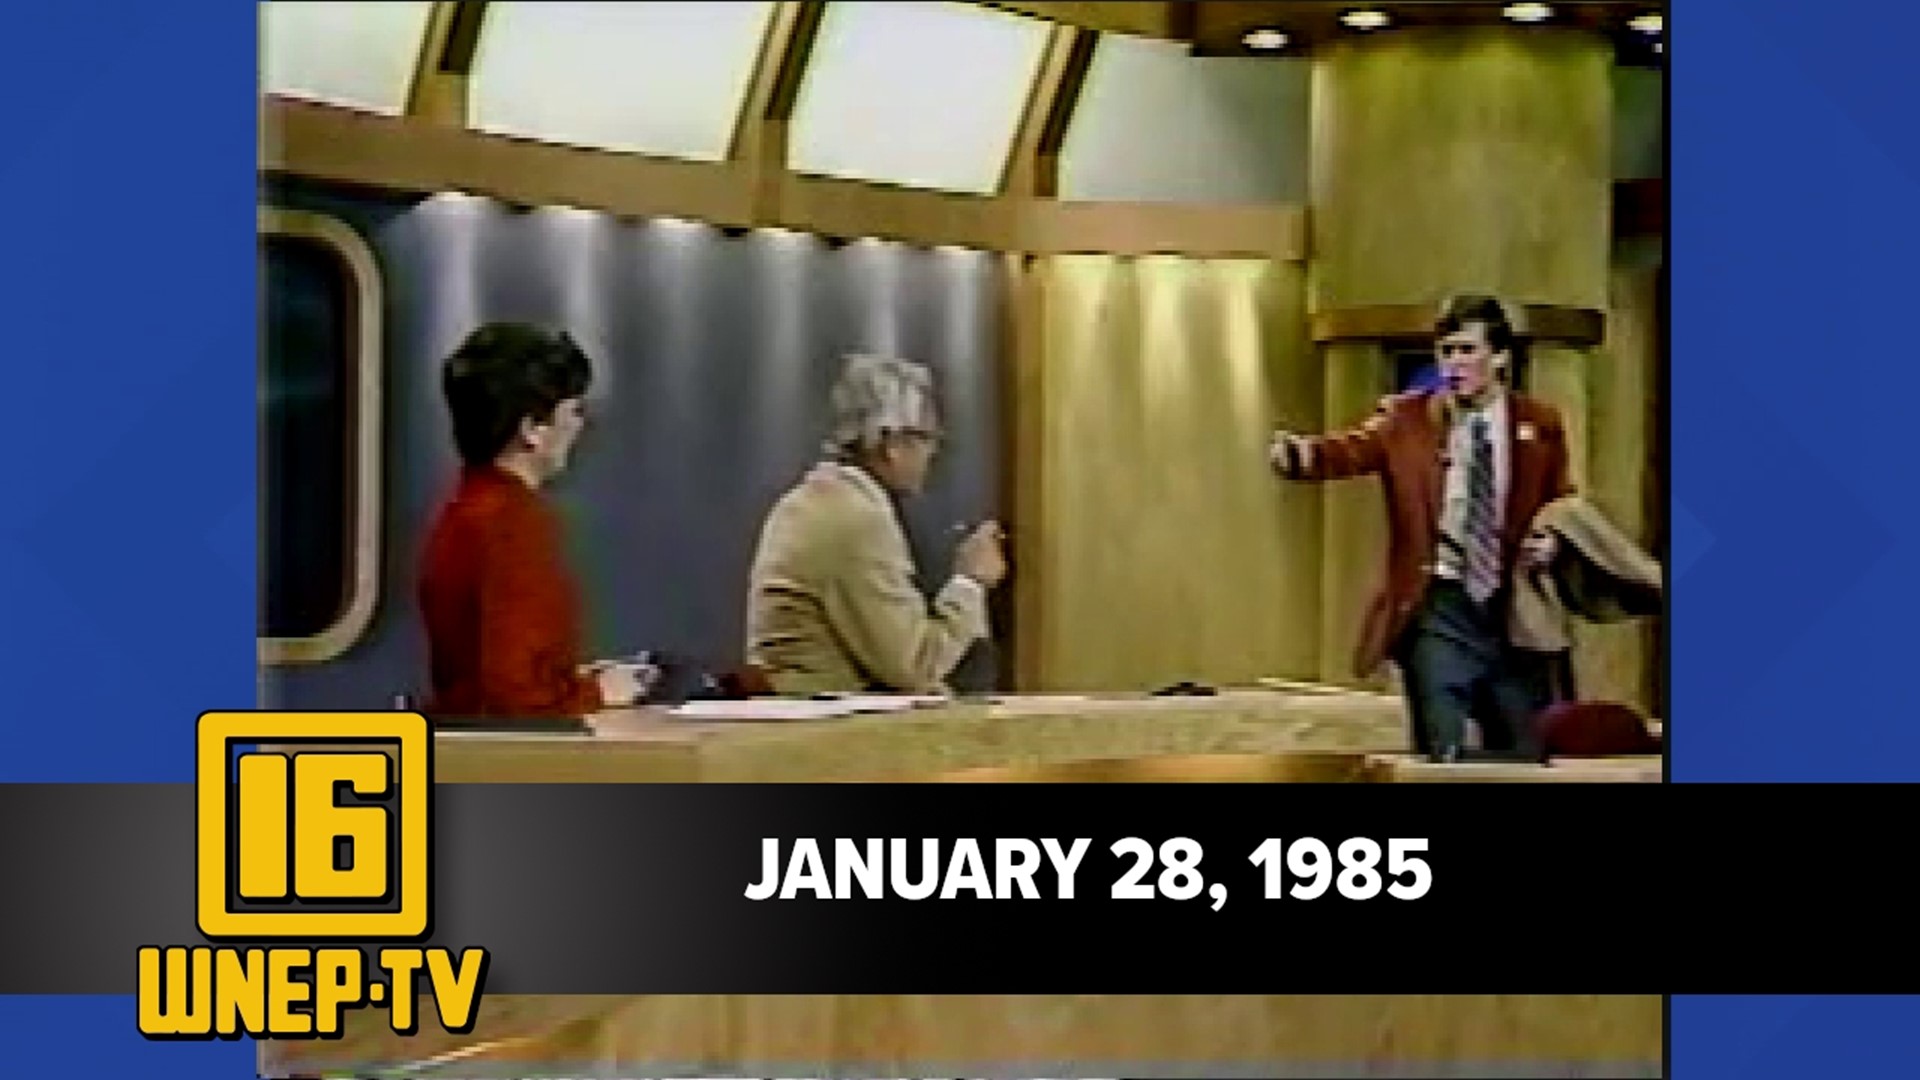 Join Karen Harch and Nolan Johannes with curated stories from January 28, 1985.